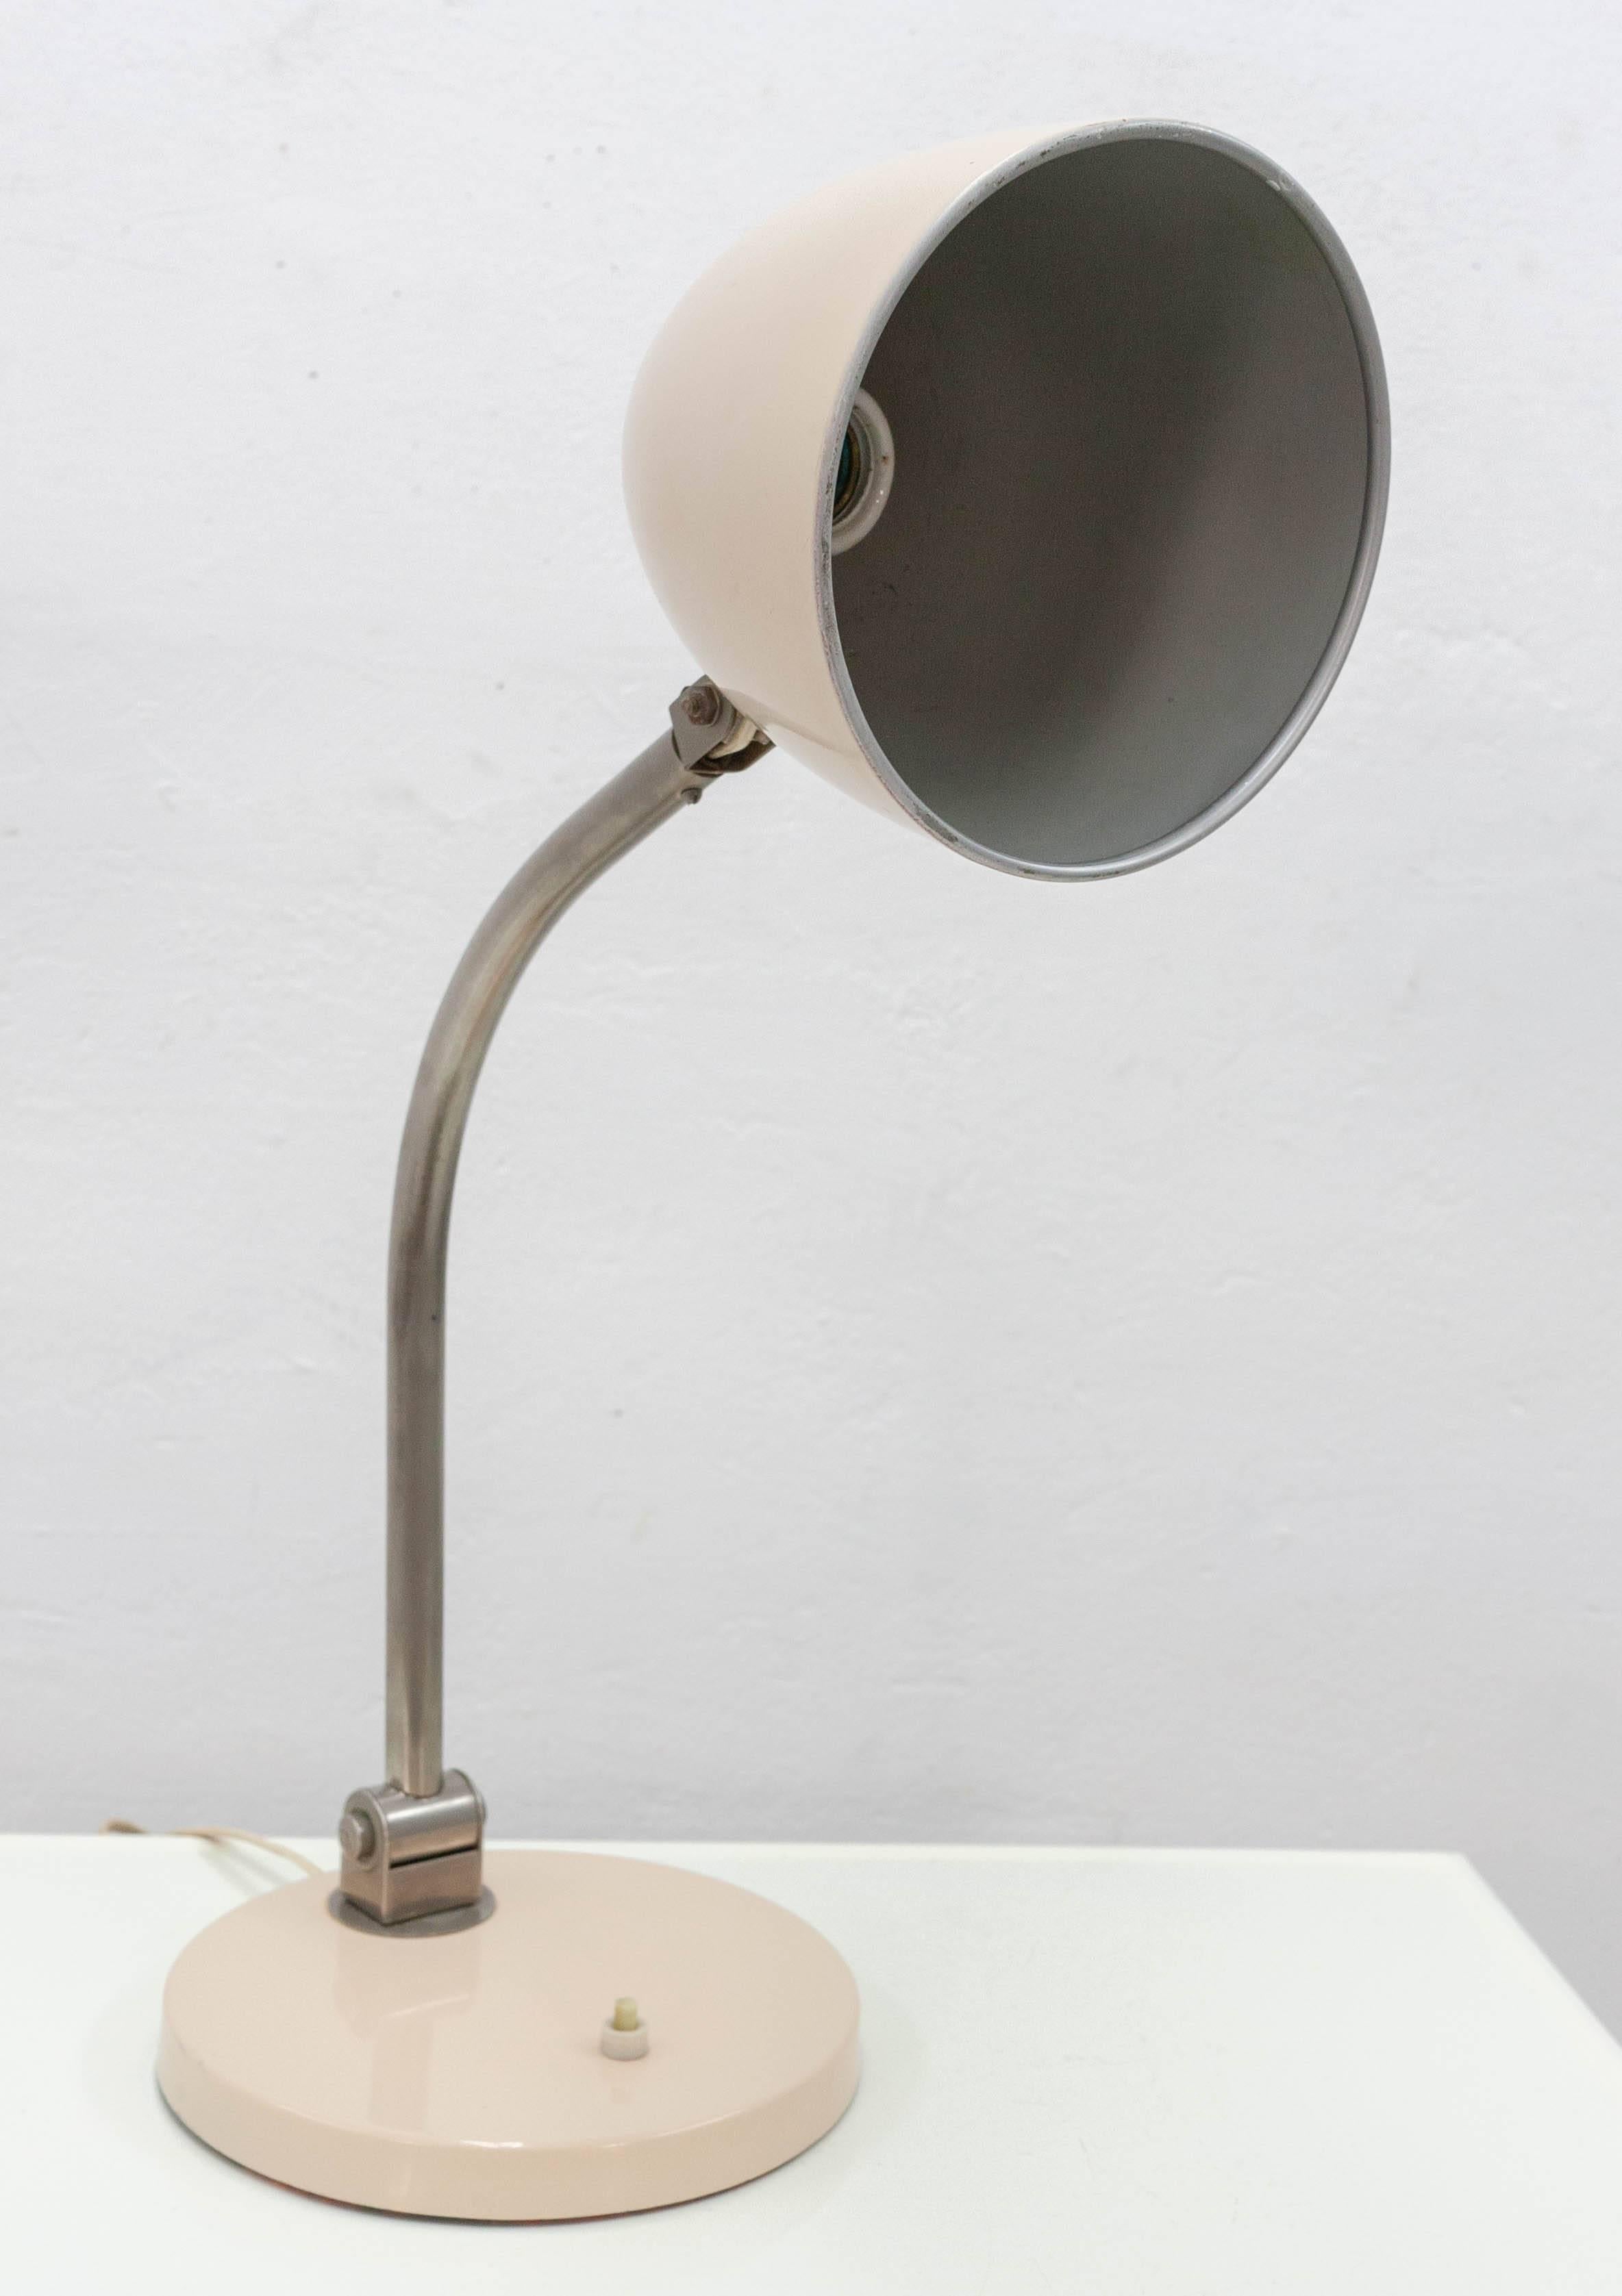 1950s Hala Zeist desk lamp in its original warm beige color. Features a flexible metal arm allowing it a wide range of motion. All original and signed in the hardware.